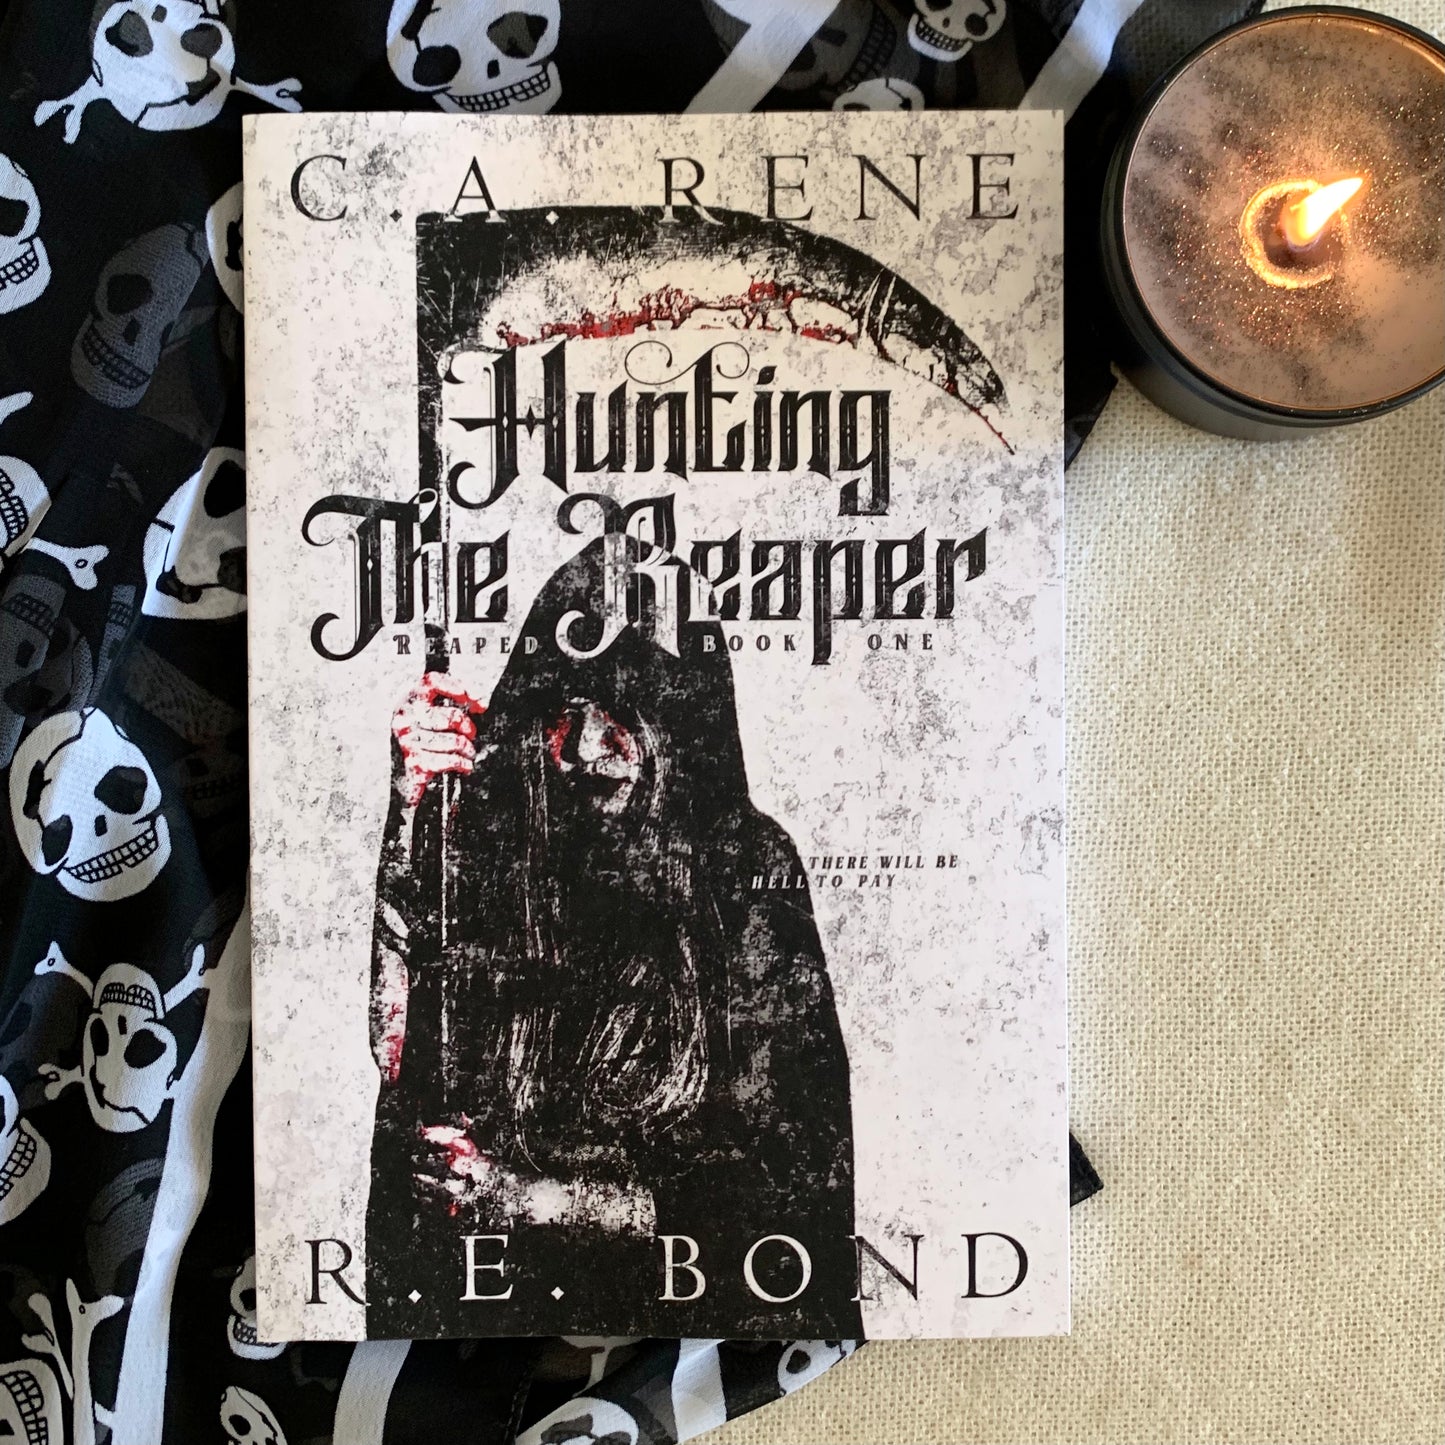 Hunting the Reaper (Reaped Book One) by C.A. Rene and R. E. Bond